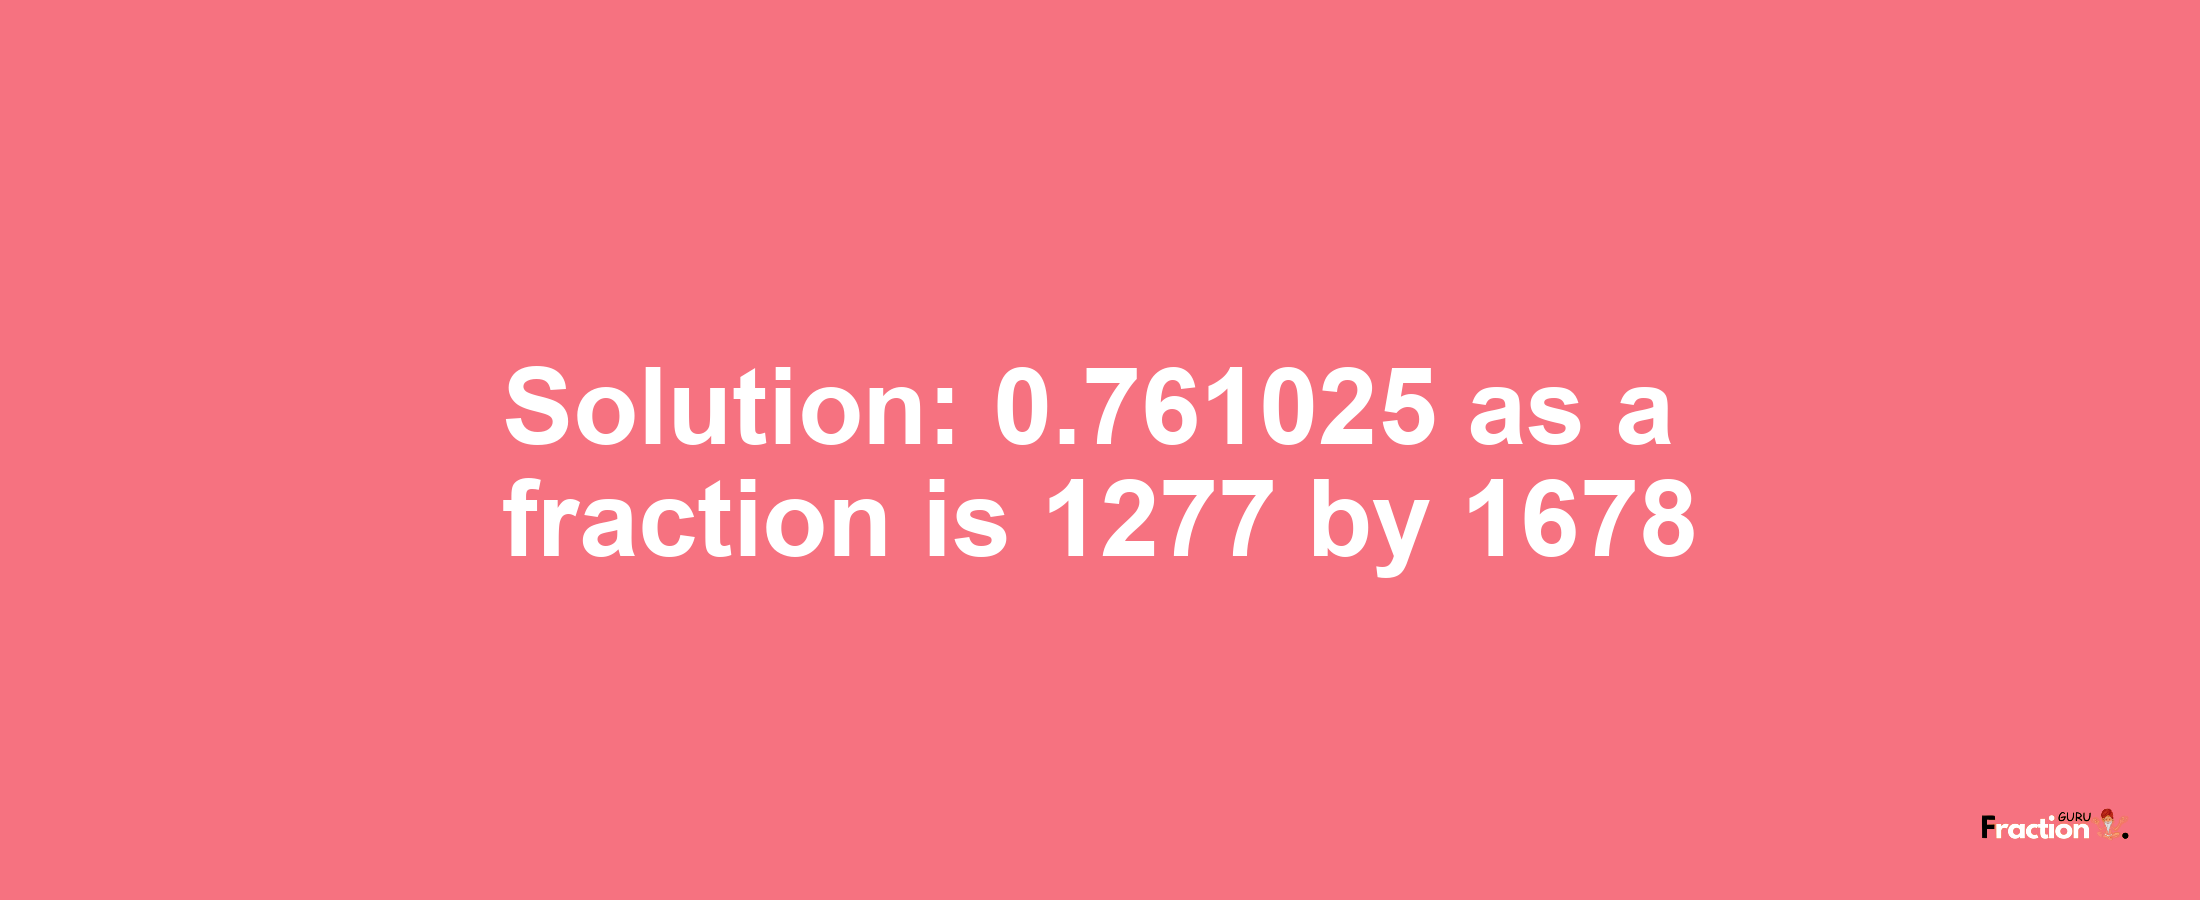 Solution:0.761025 as a fraction is 1277/1678